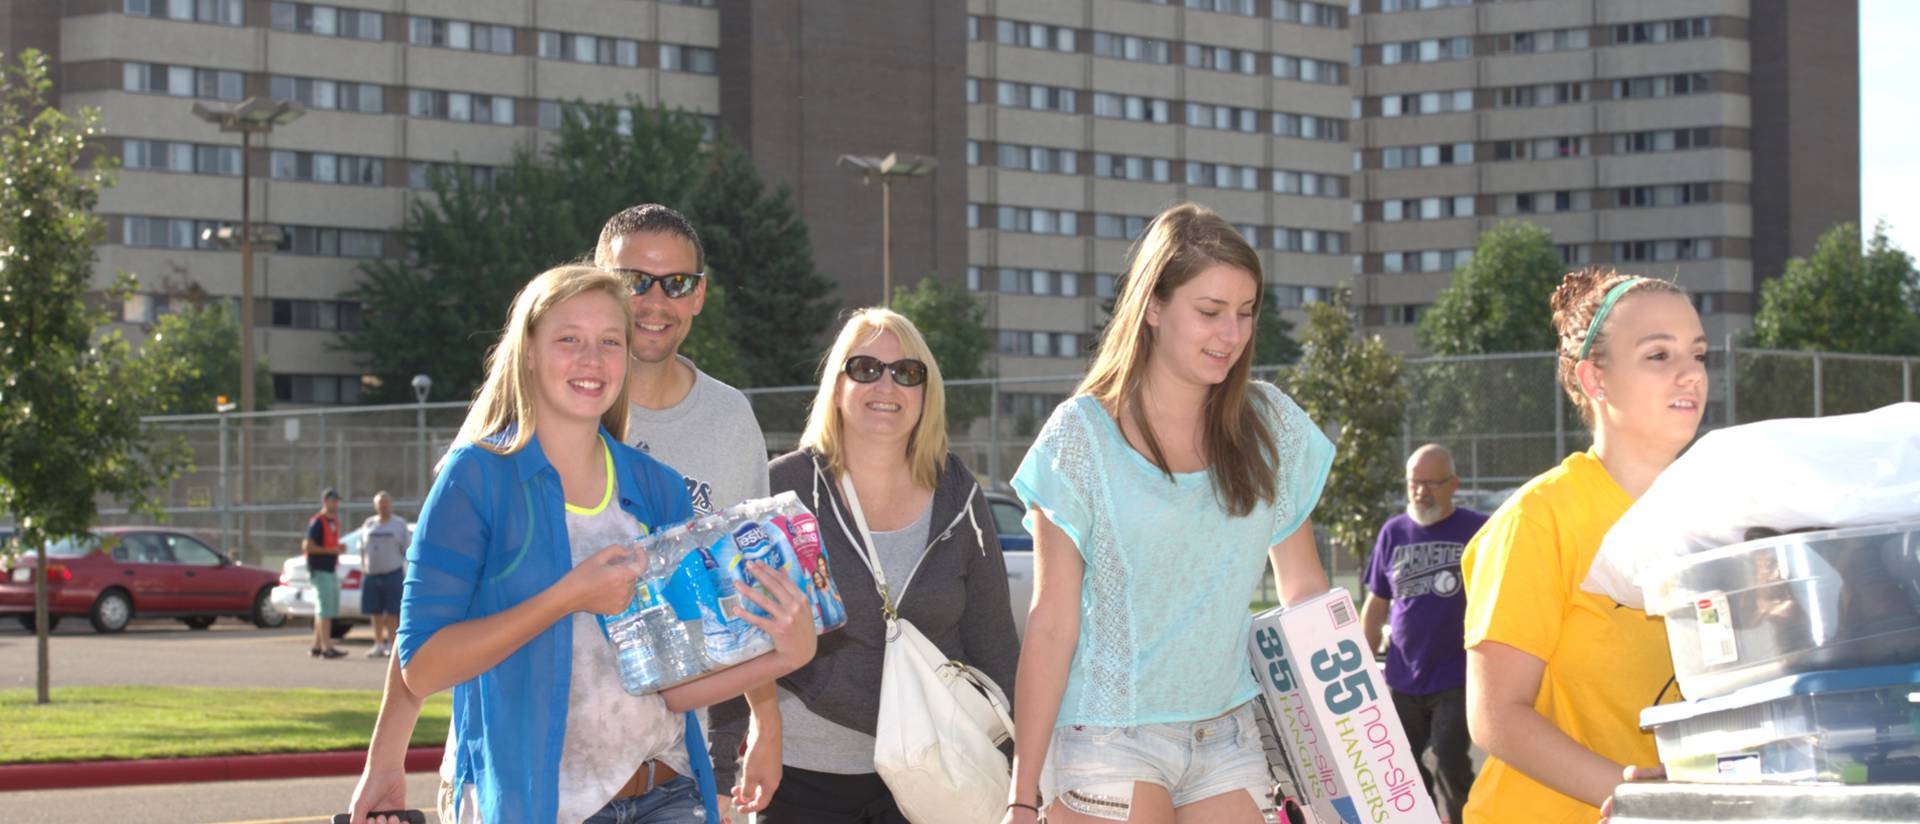 A family poses after a successful move-in to the dorms.